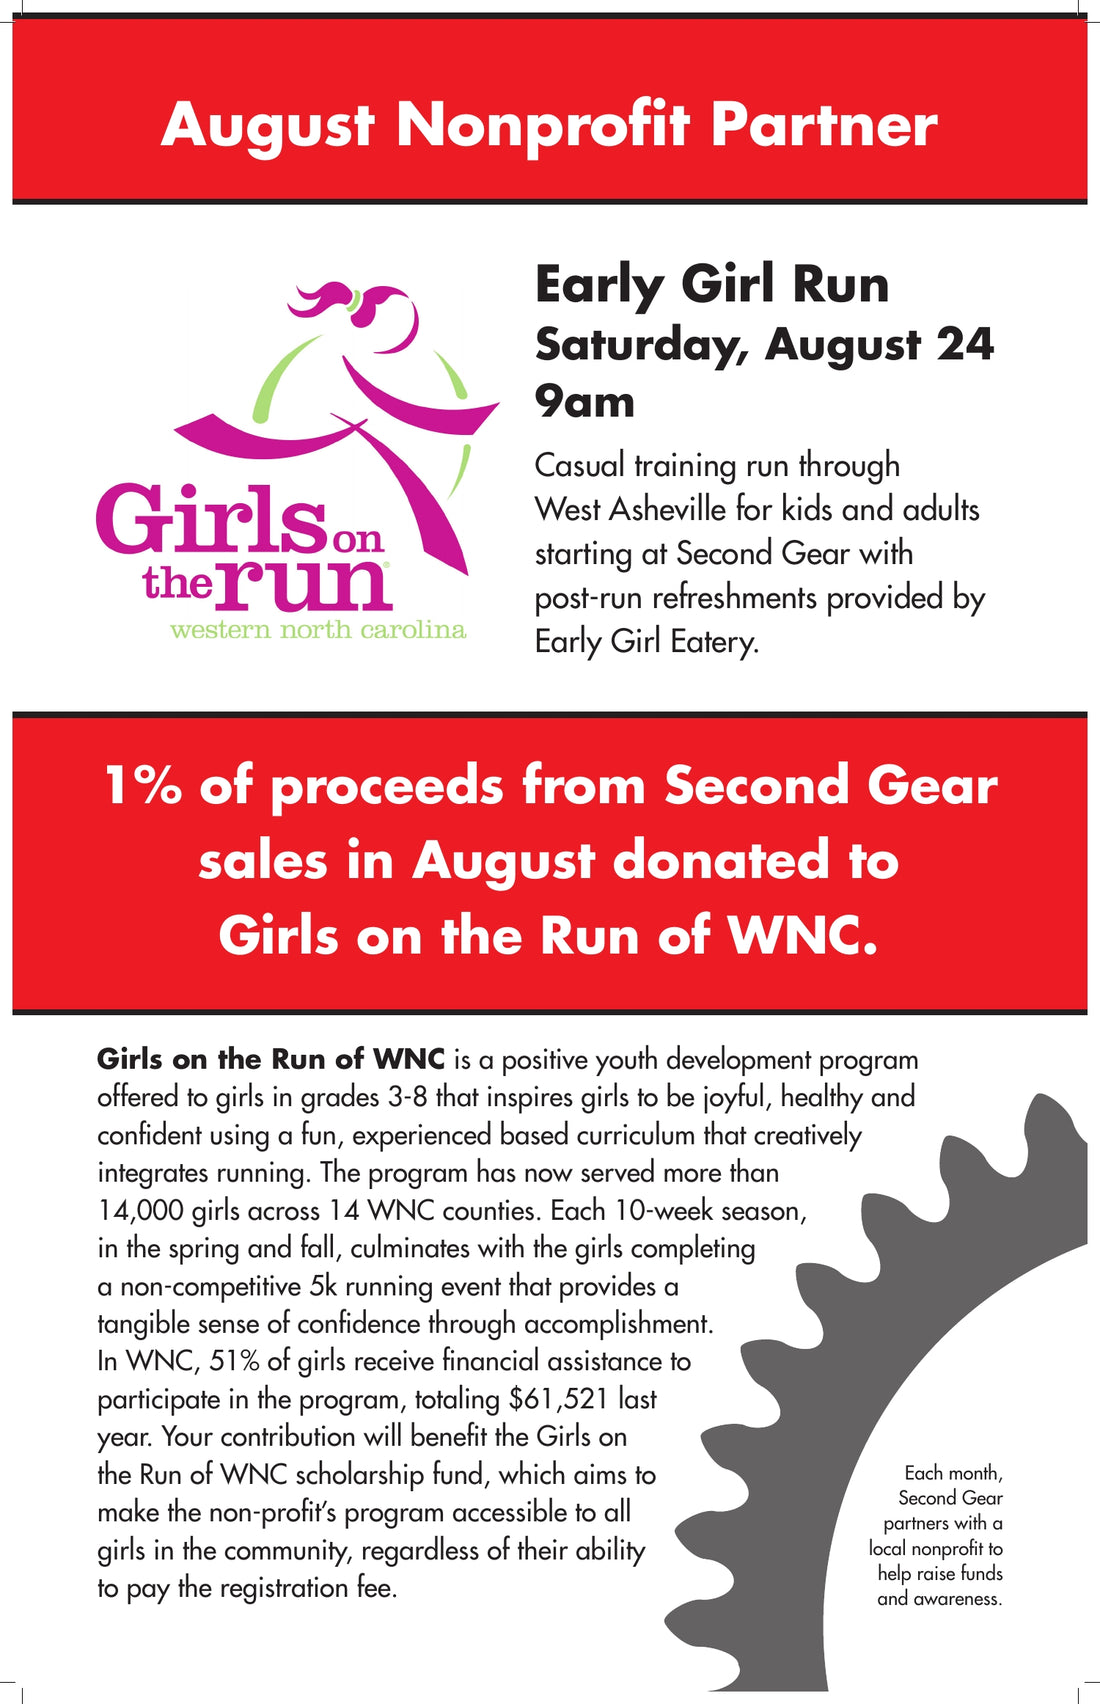 Girls on the Run, Saturday, August 24th, 9am